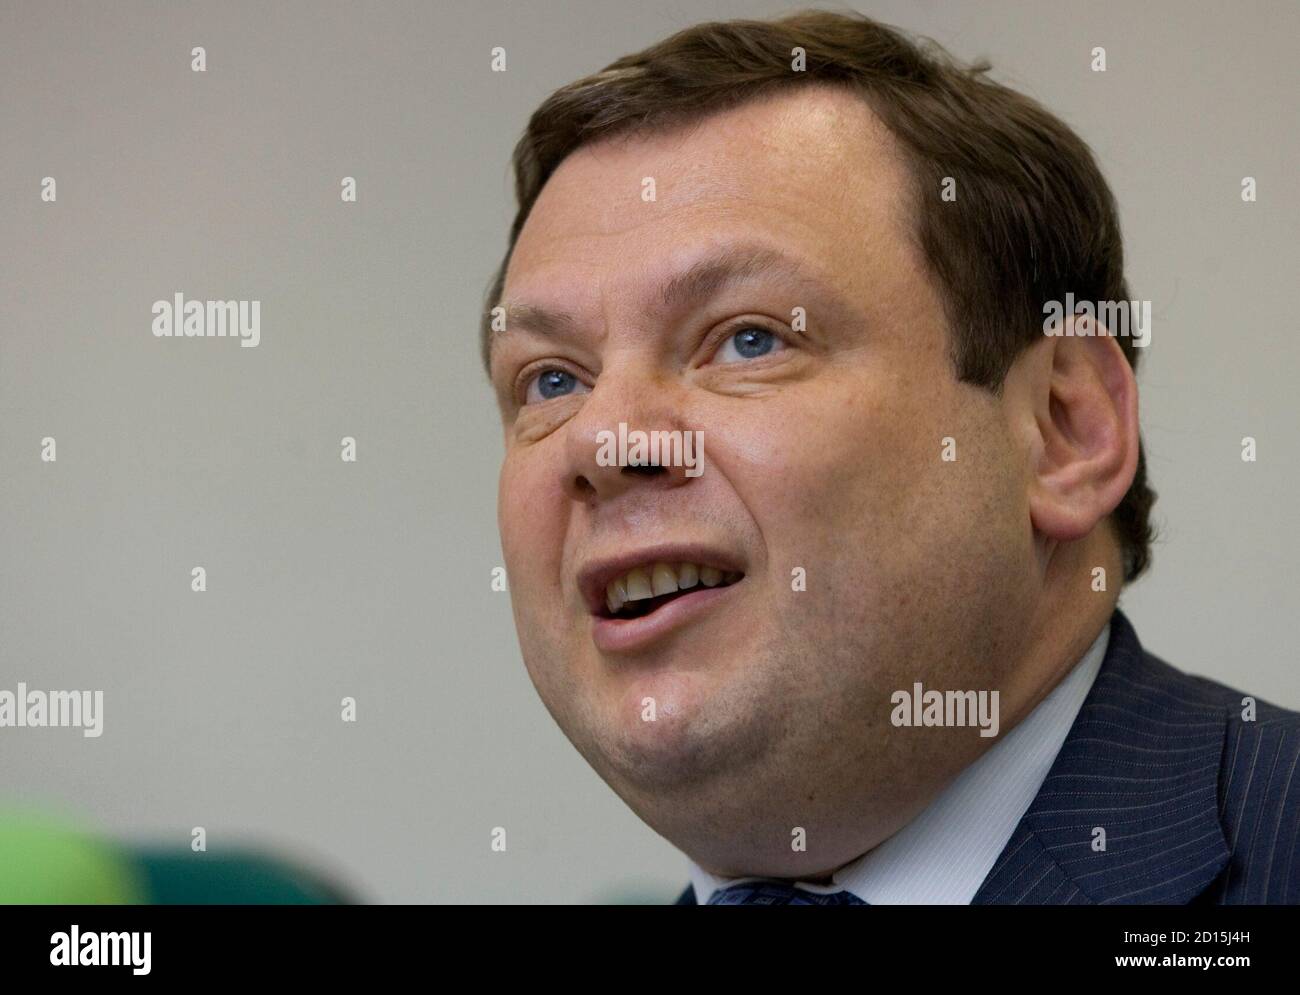 Mikhail Fridman, chairman of Alfa Group, speaks during his news conference in Moscow, June 16, 2008. Russian co-owners in oil venture TNK-BP asked oil major BP to offer them an option to exchange their holdings in TNK-BP for BP stock but do not want to conduct a swap now, a key Russian shareholder said on Monday.  REUTERS/Sergei Karpukhin  (RUSSIA) Stock Photo